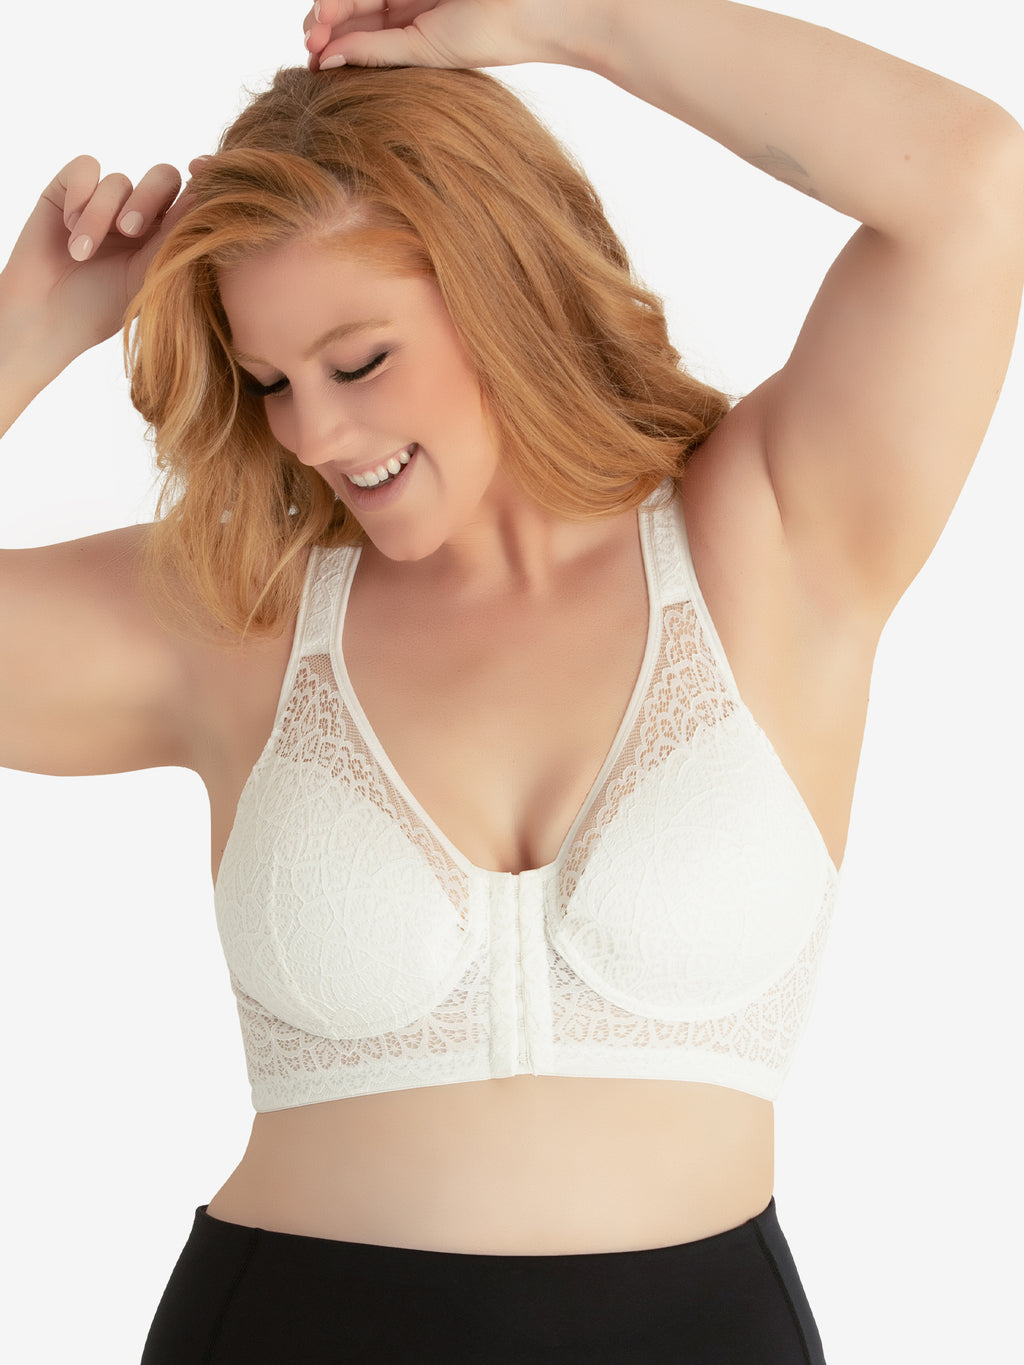 Lacy Front Hook Bra, White, Large